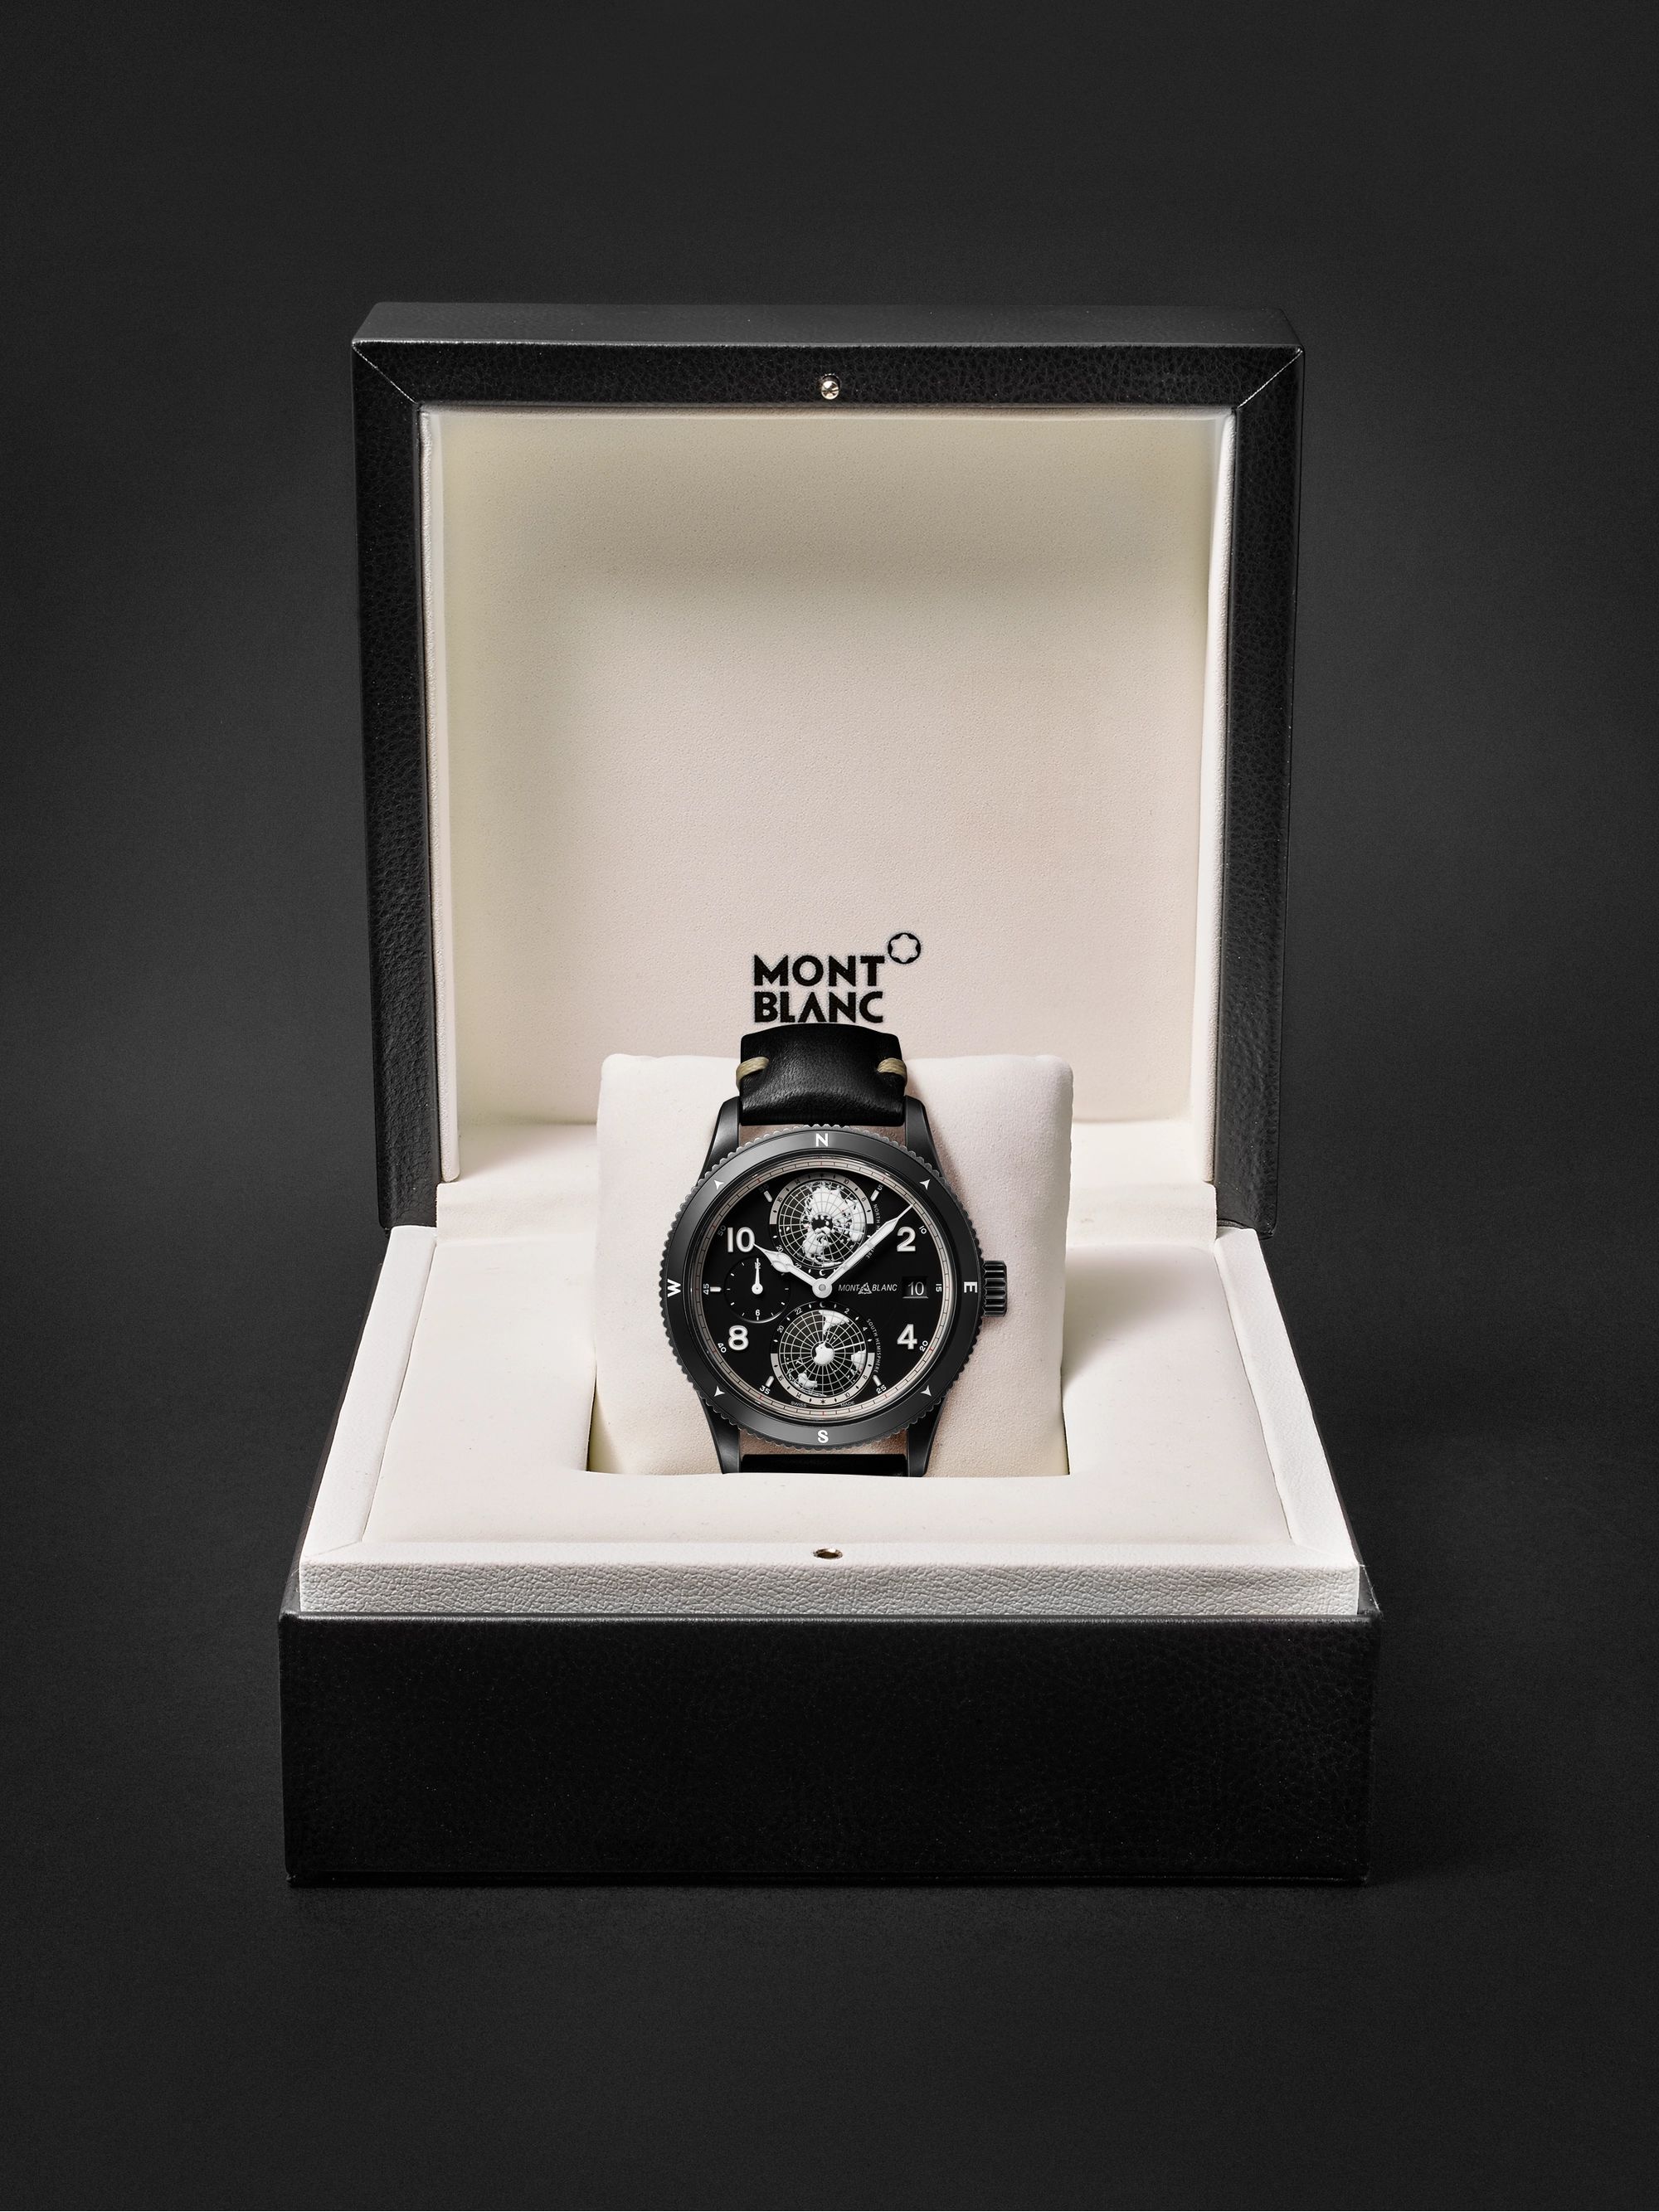 MONTBLANC 1858 Geosphere Limited Edition Automatic 42mm Distressed Stainless Steel and Leather Watch, Ref. No. 128257